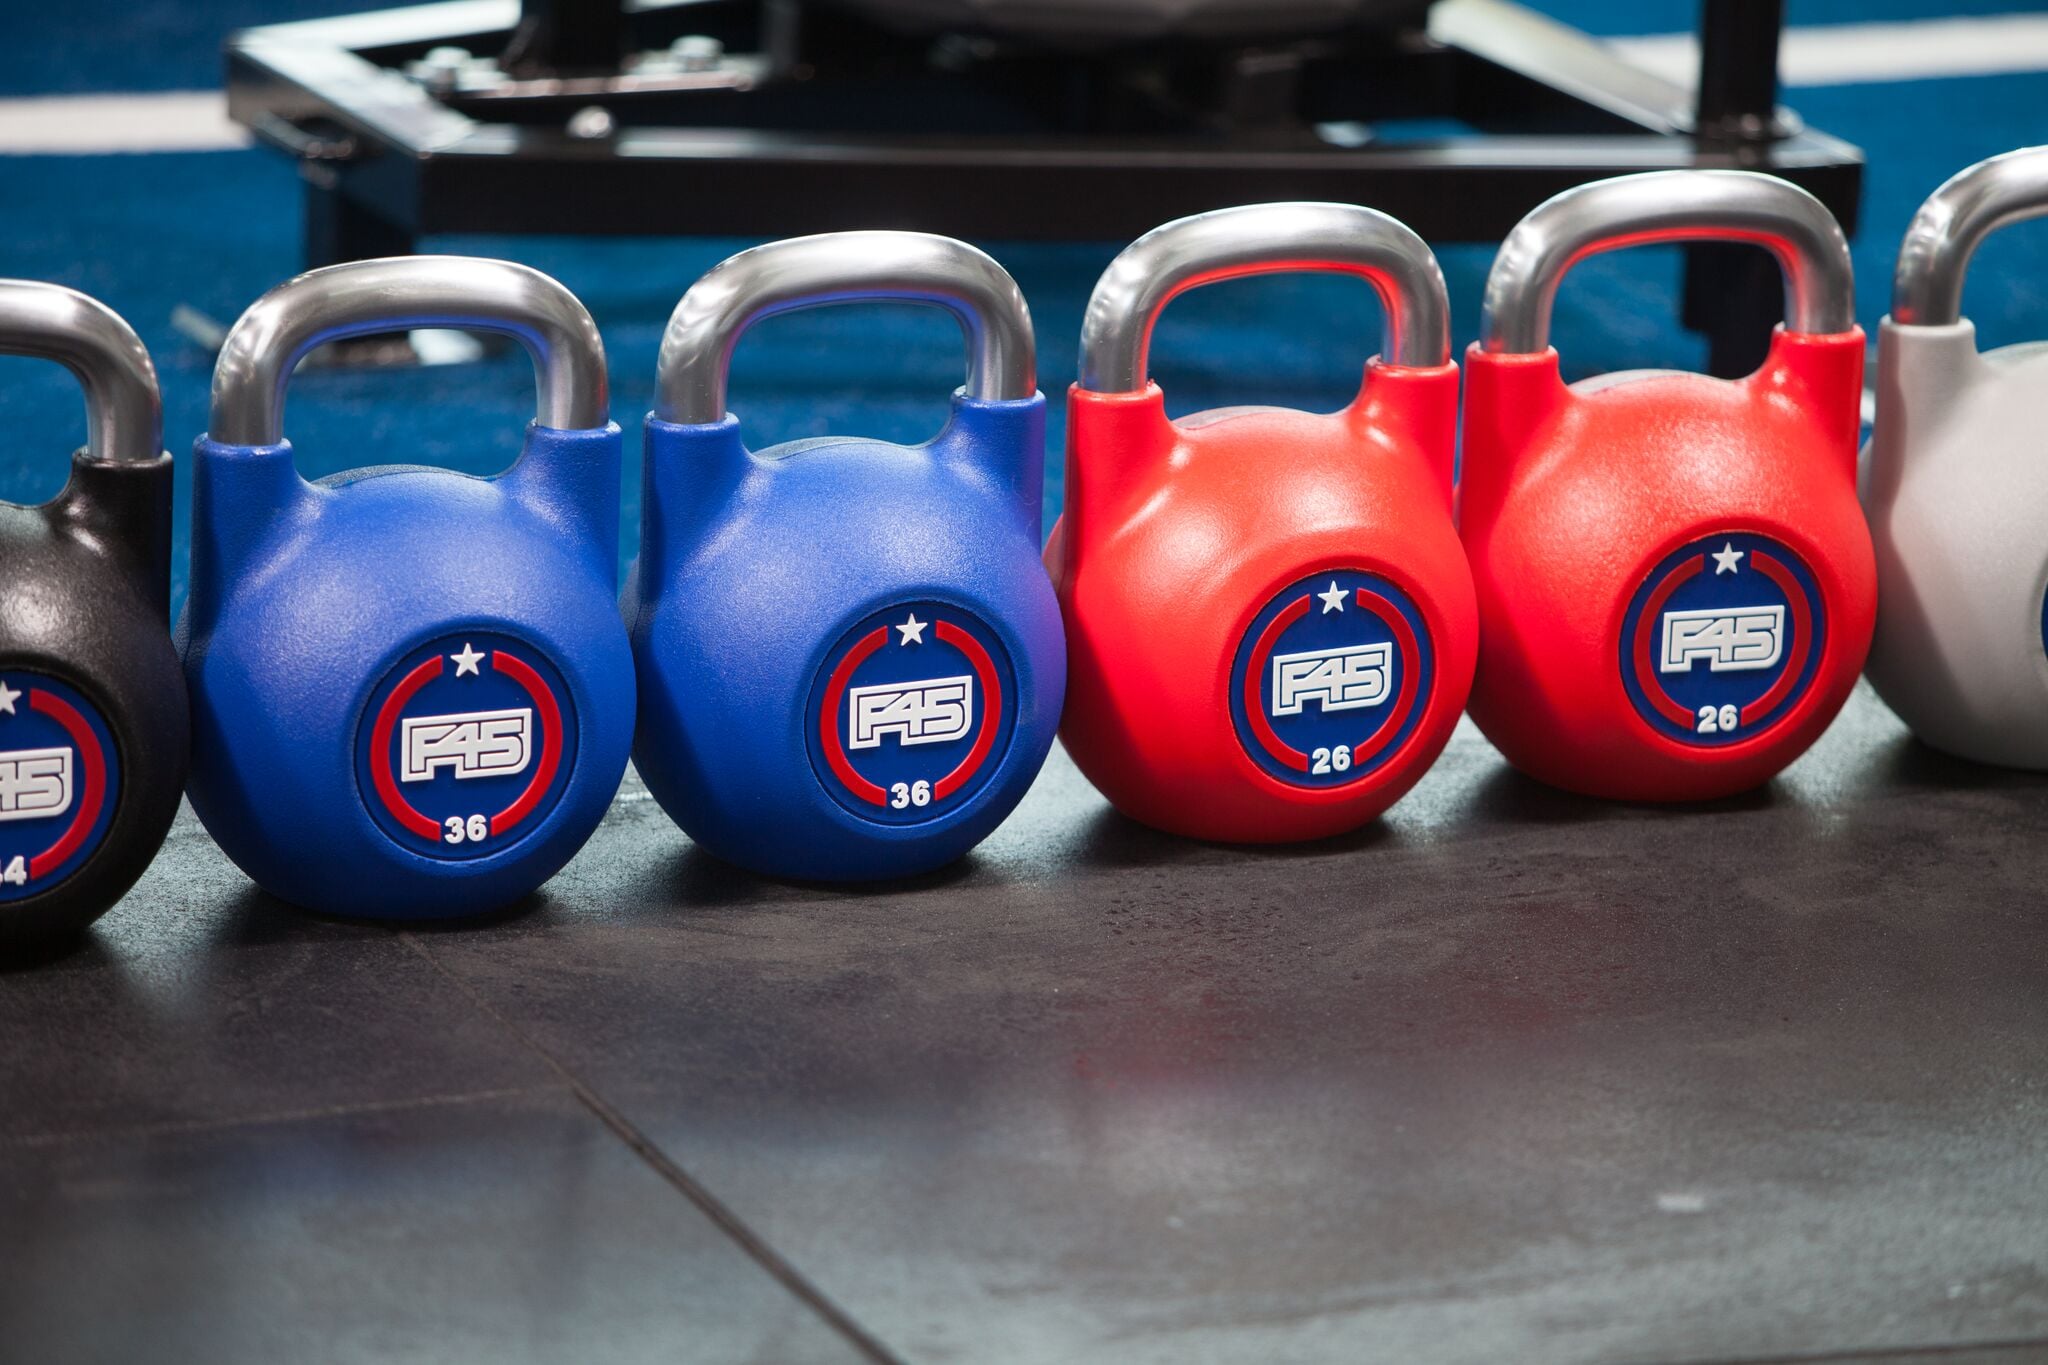 F45 Challenge review: how I lost 7% body fat in 8 weeks – and fell in love  with exercise